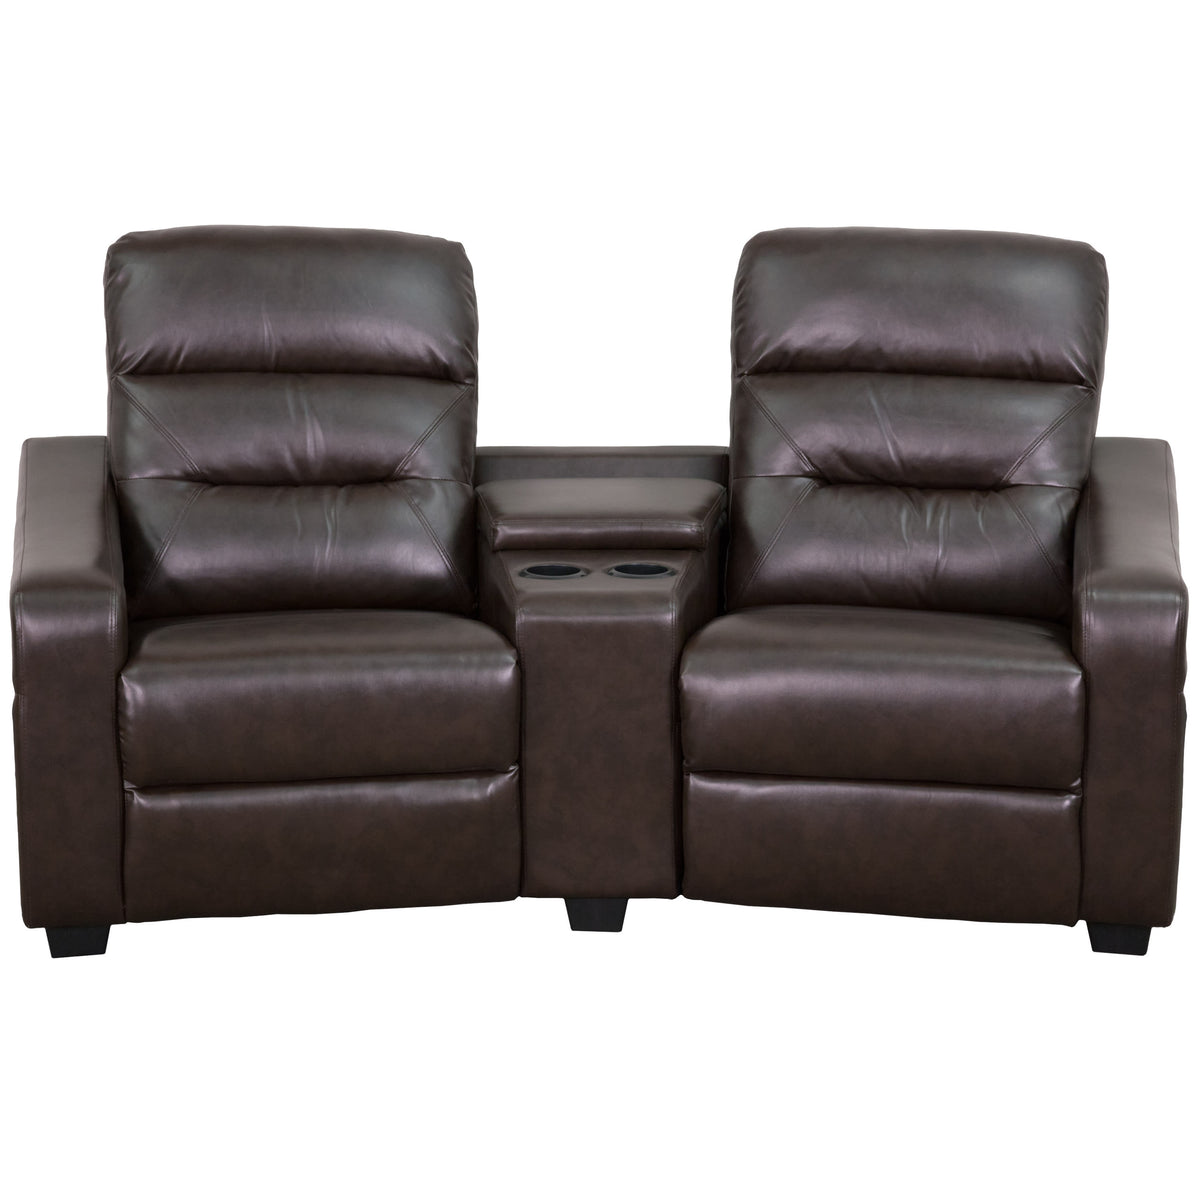 Brown |#| 2-Seat Reclining Brown LeatherSoft Tufted Bustle Back Seating Unit w/Cup Holders